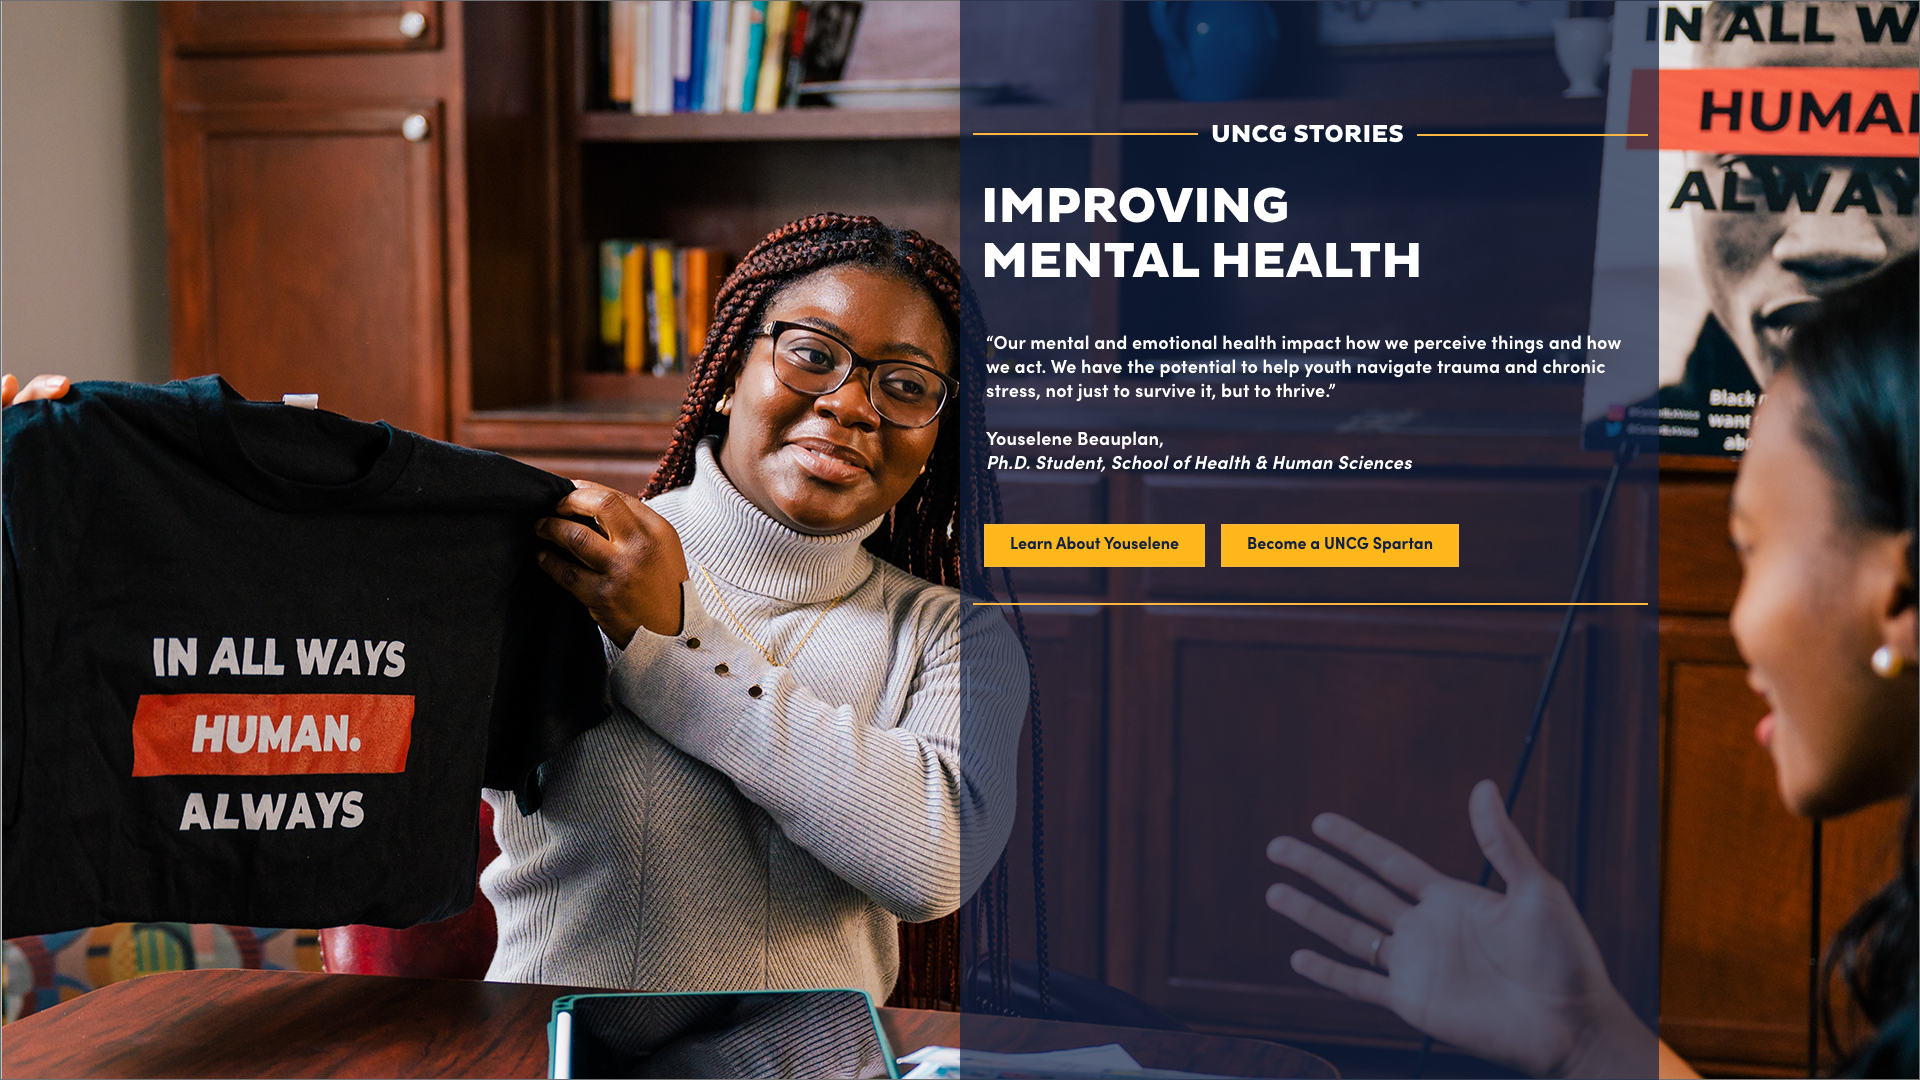 UNCG Stories Block for new homepage design